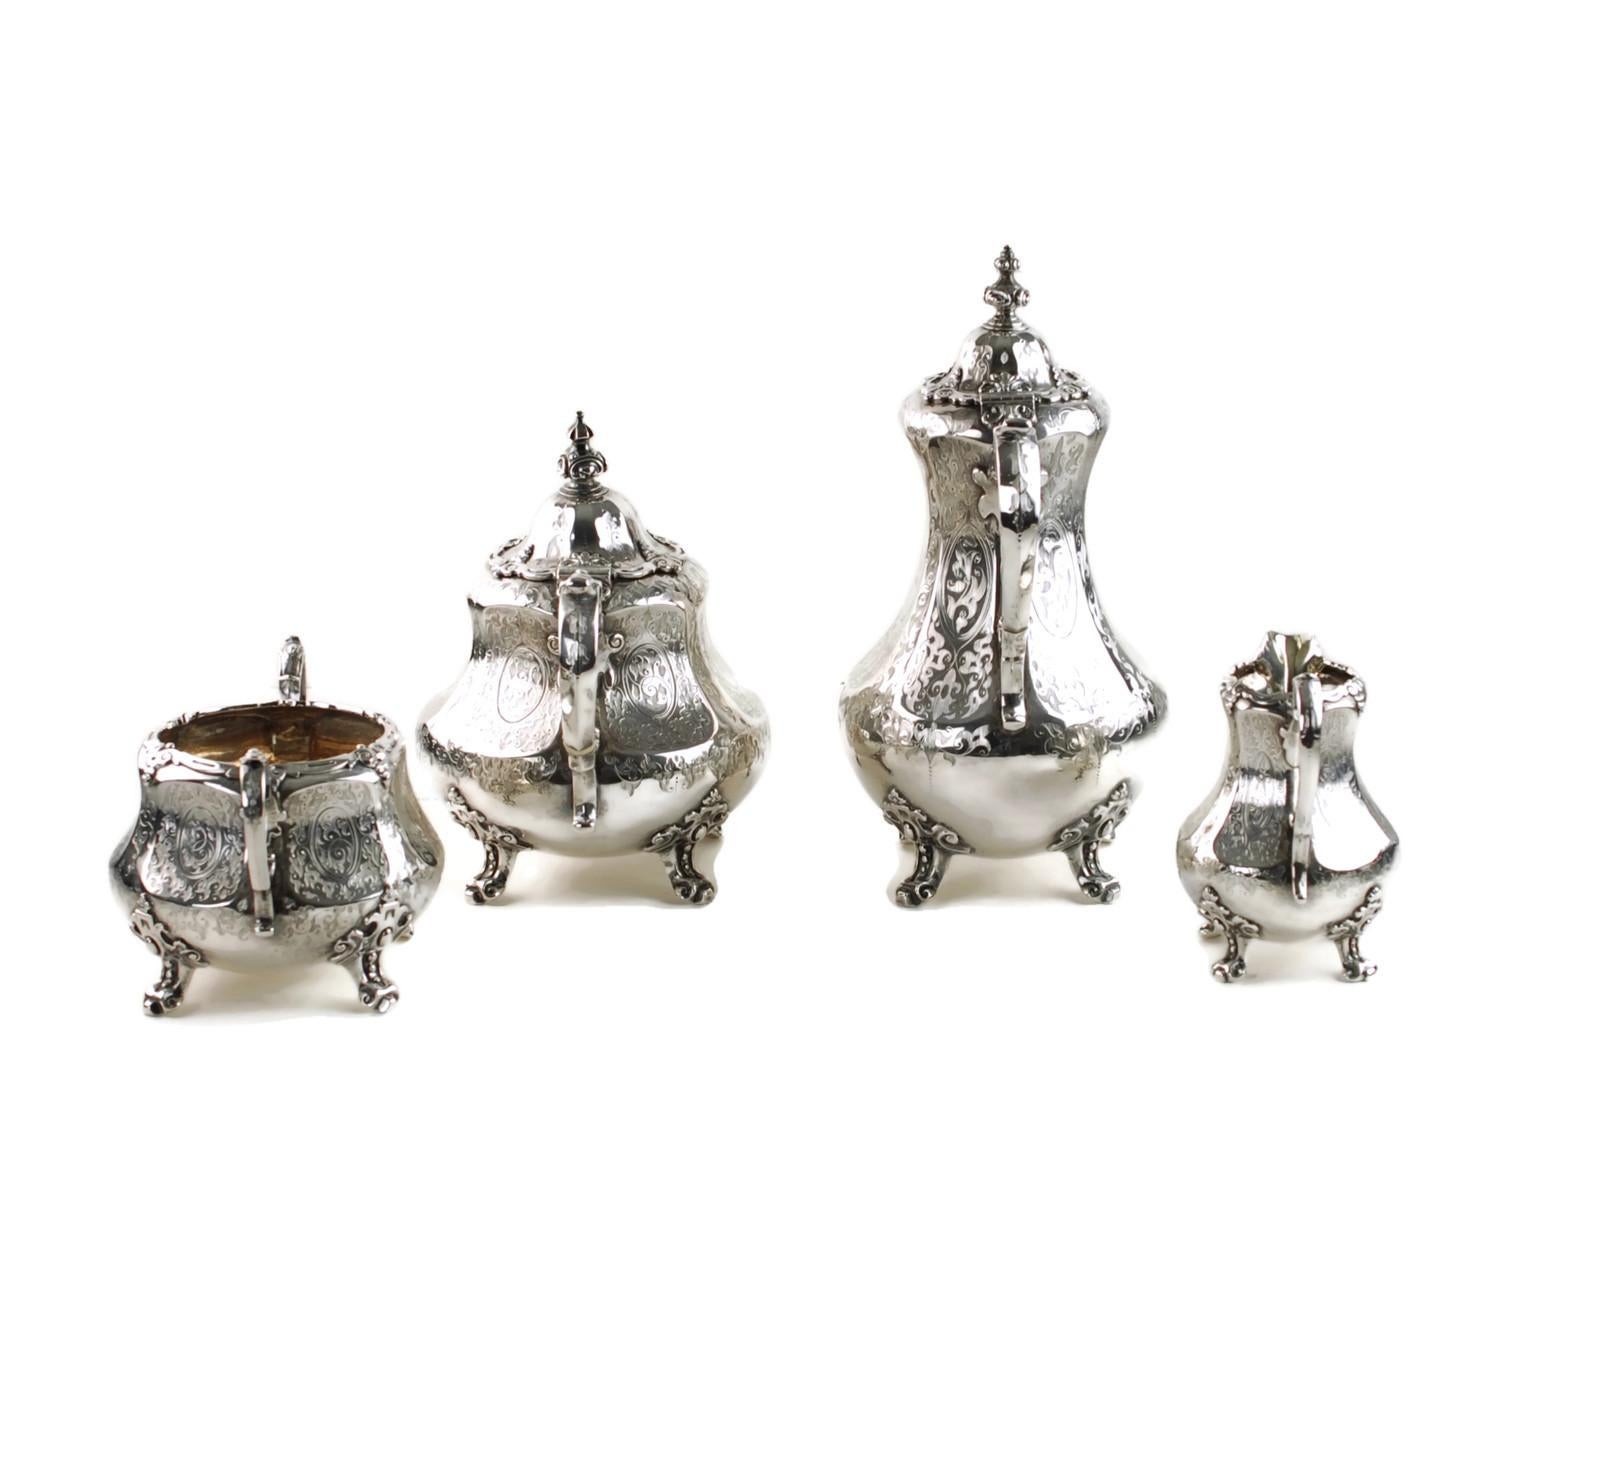 English Antique Sterling Silver 4-Piece Engraved Tea & Coffee Set Daniel & Charles Houle